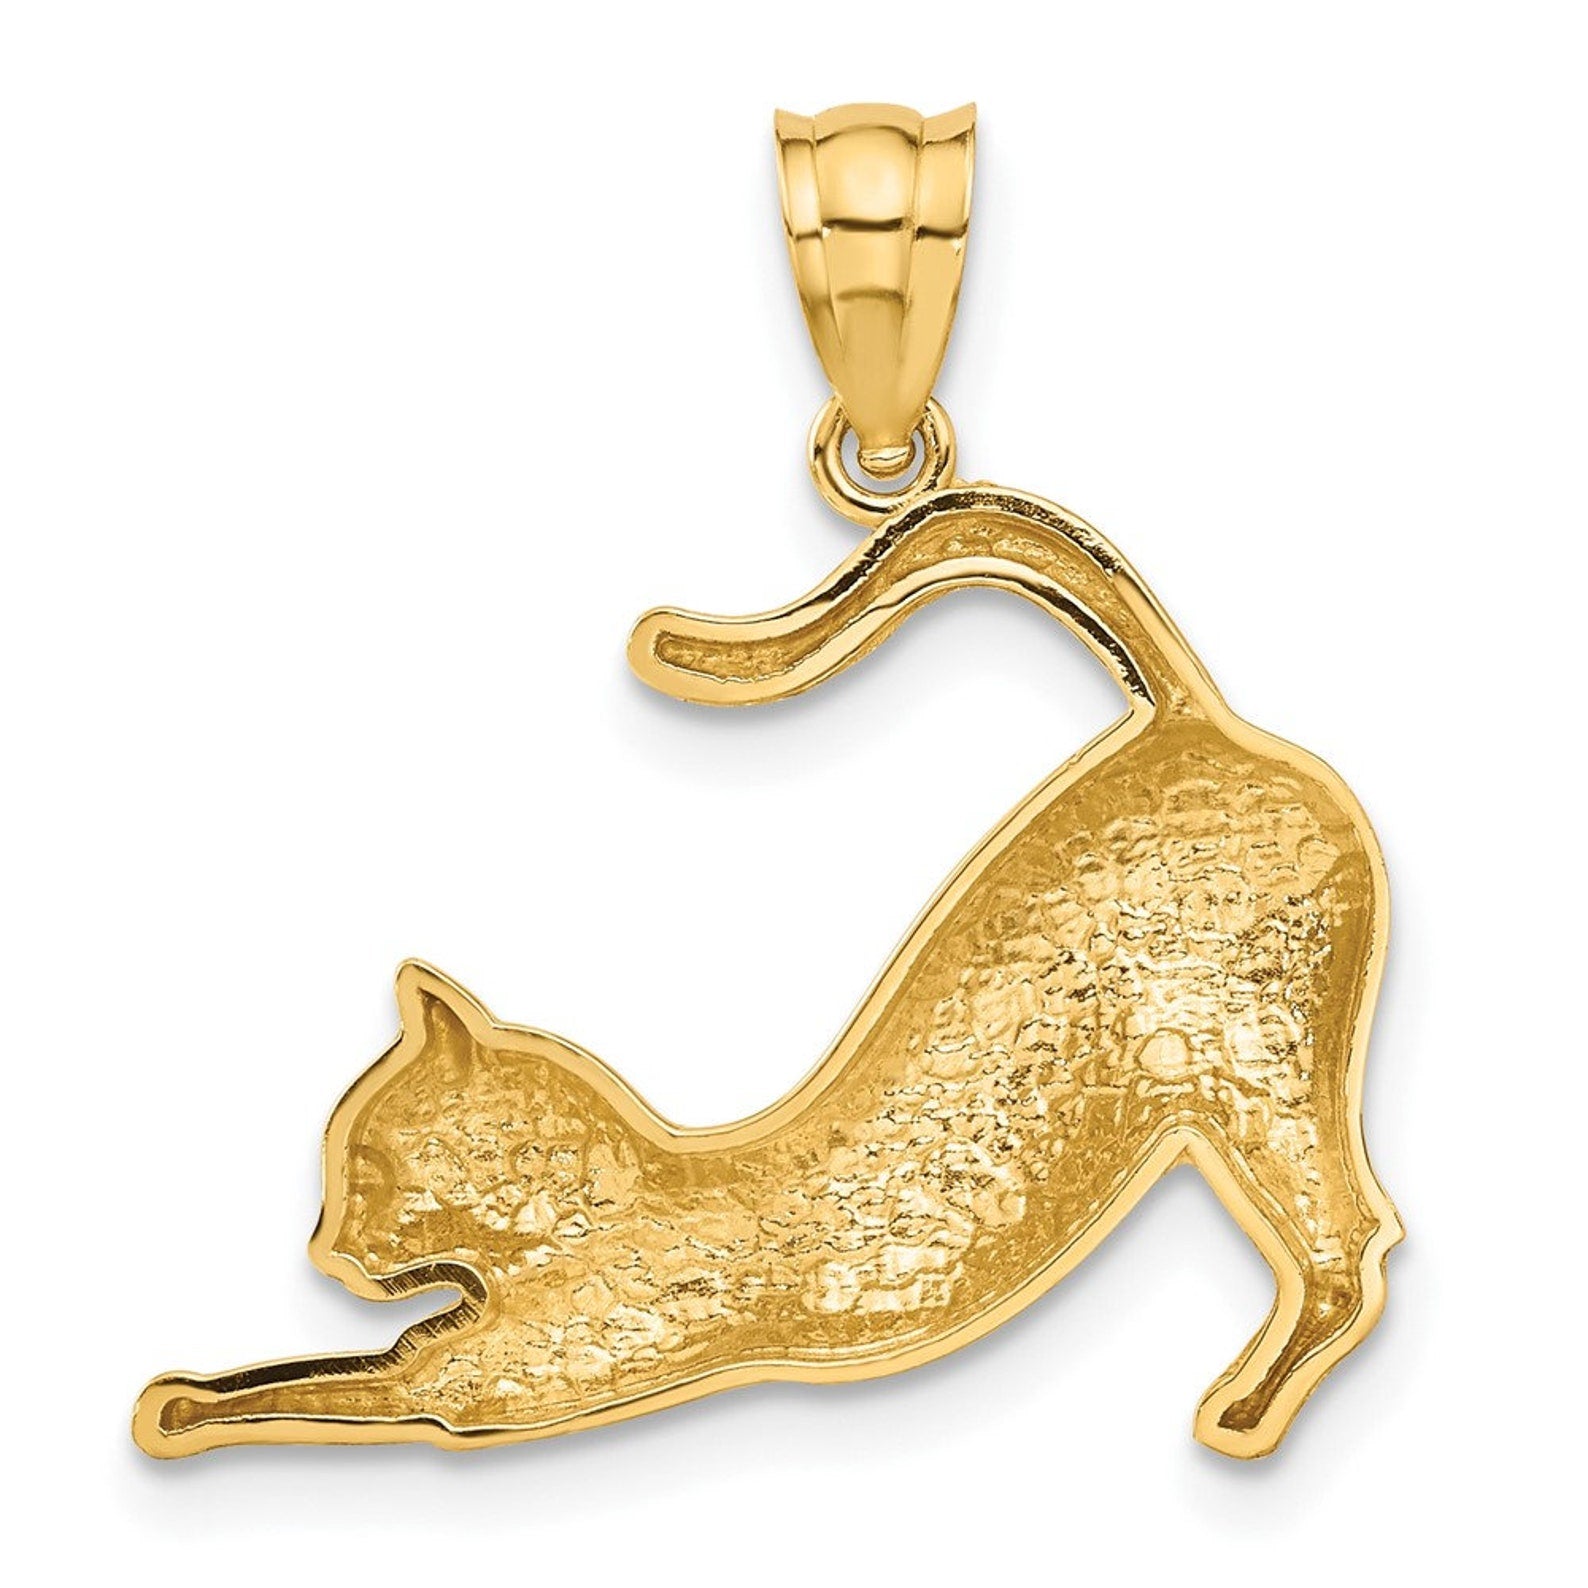 Gold Stretching Cat Pendant - Charlie & Co. Jewelry